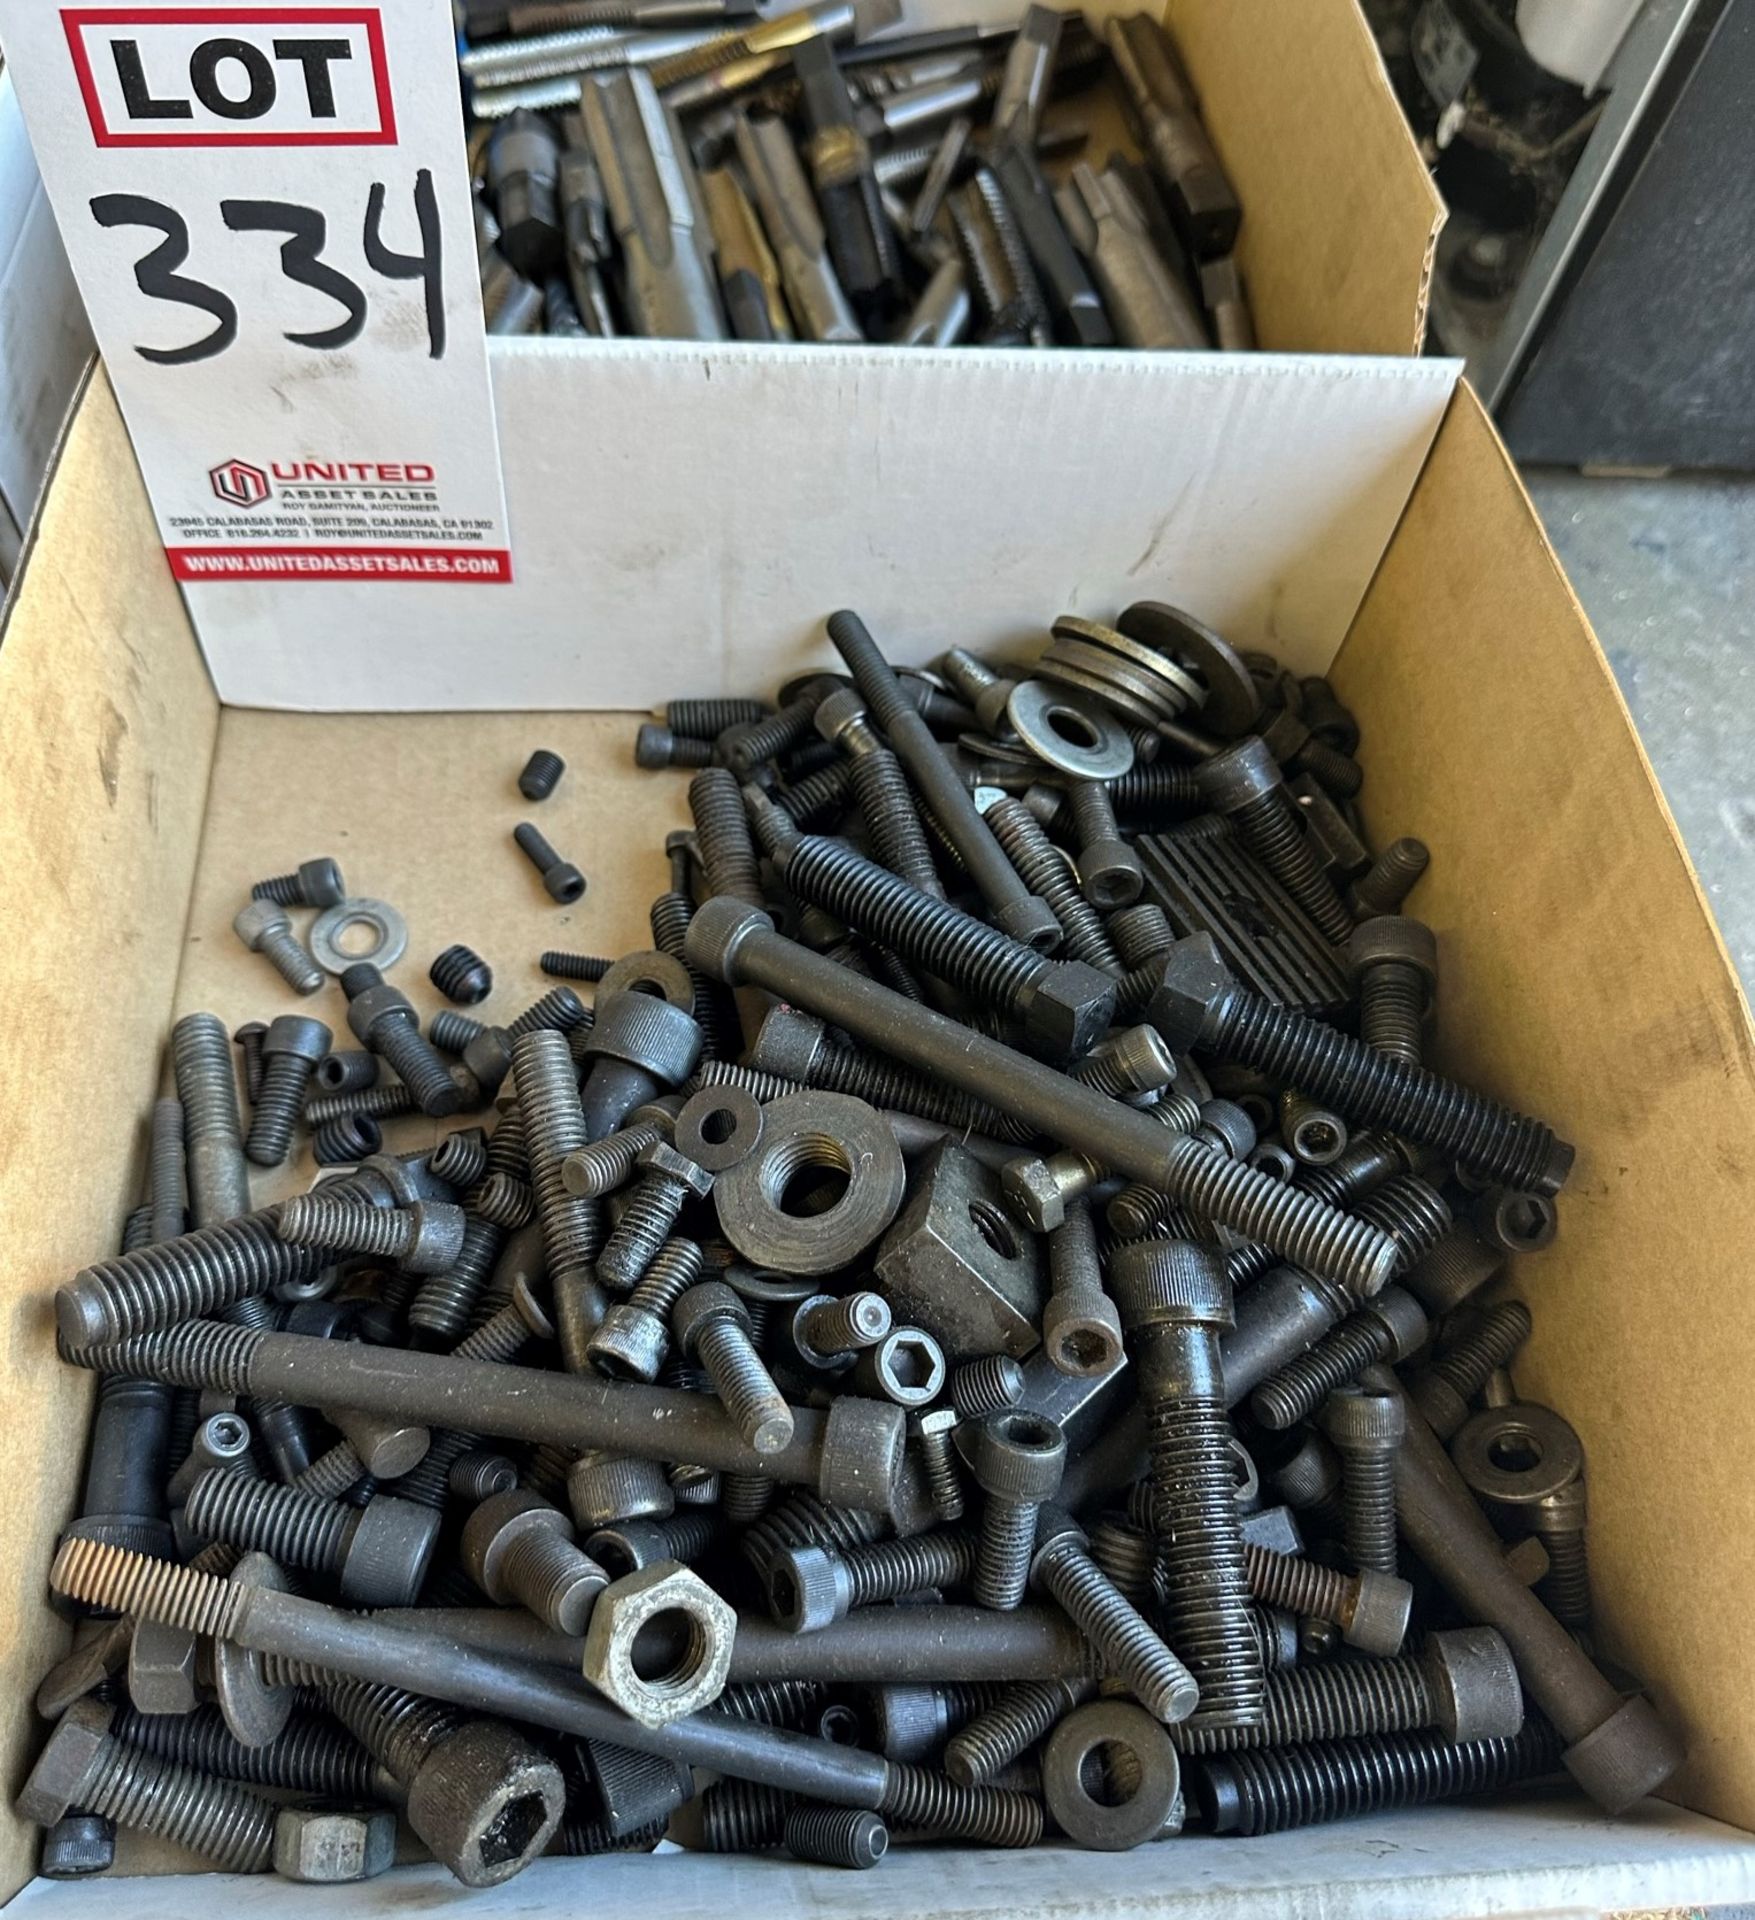 LOT - CAP SCREWS, WASHERS AND RELATED HOLD-DOWN ITEMS